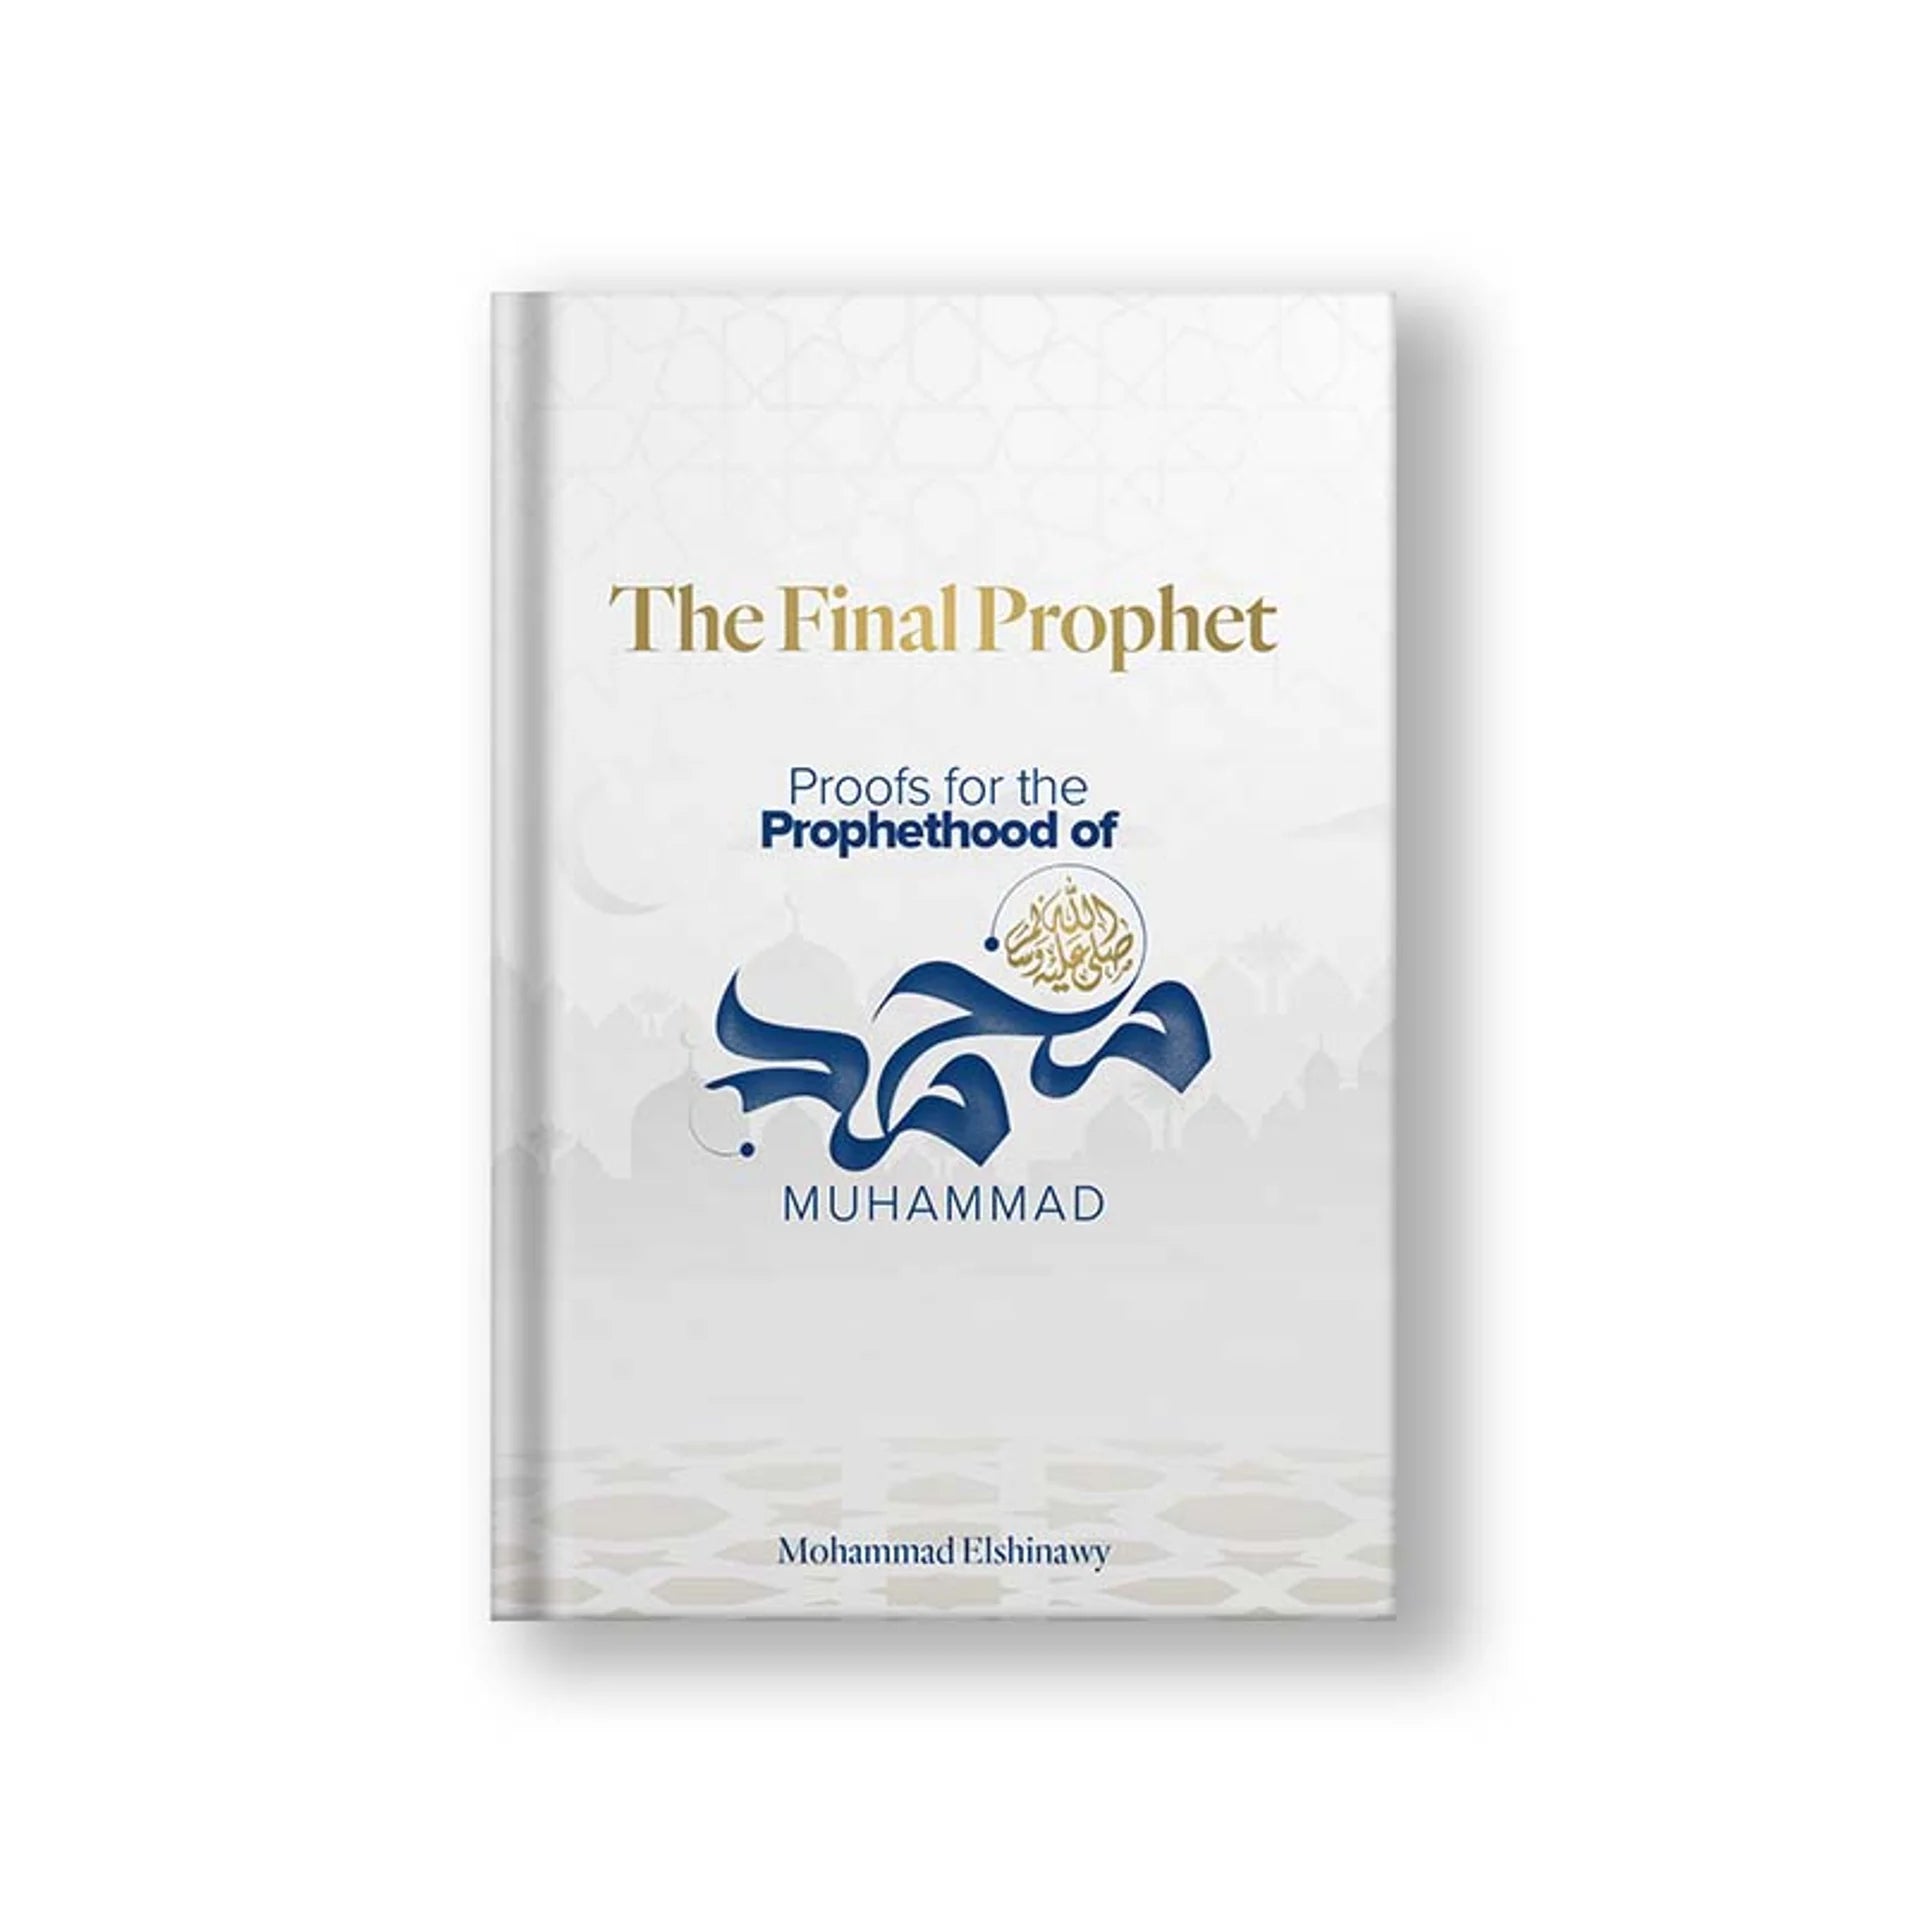 The Final Prophet: Proof of the Prophethood of Muhammad (as)